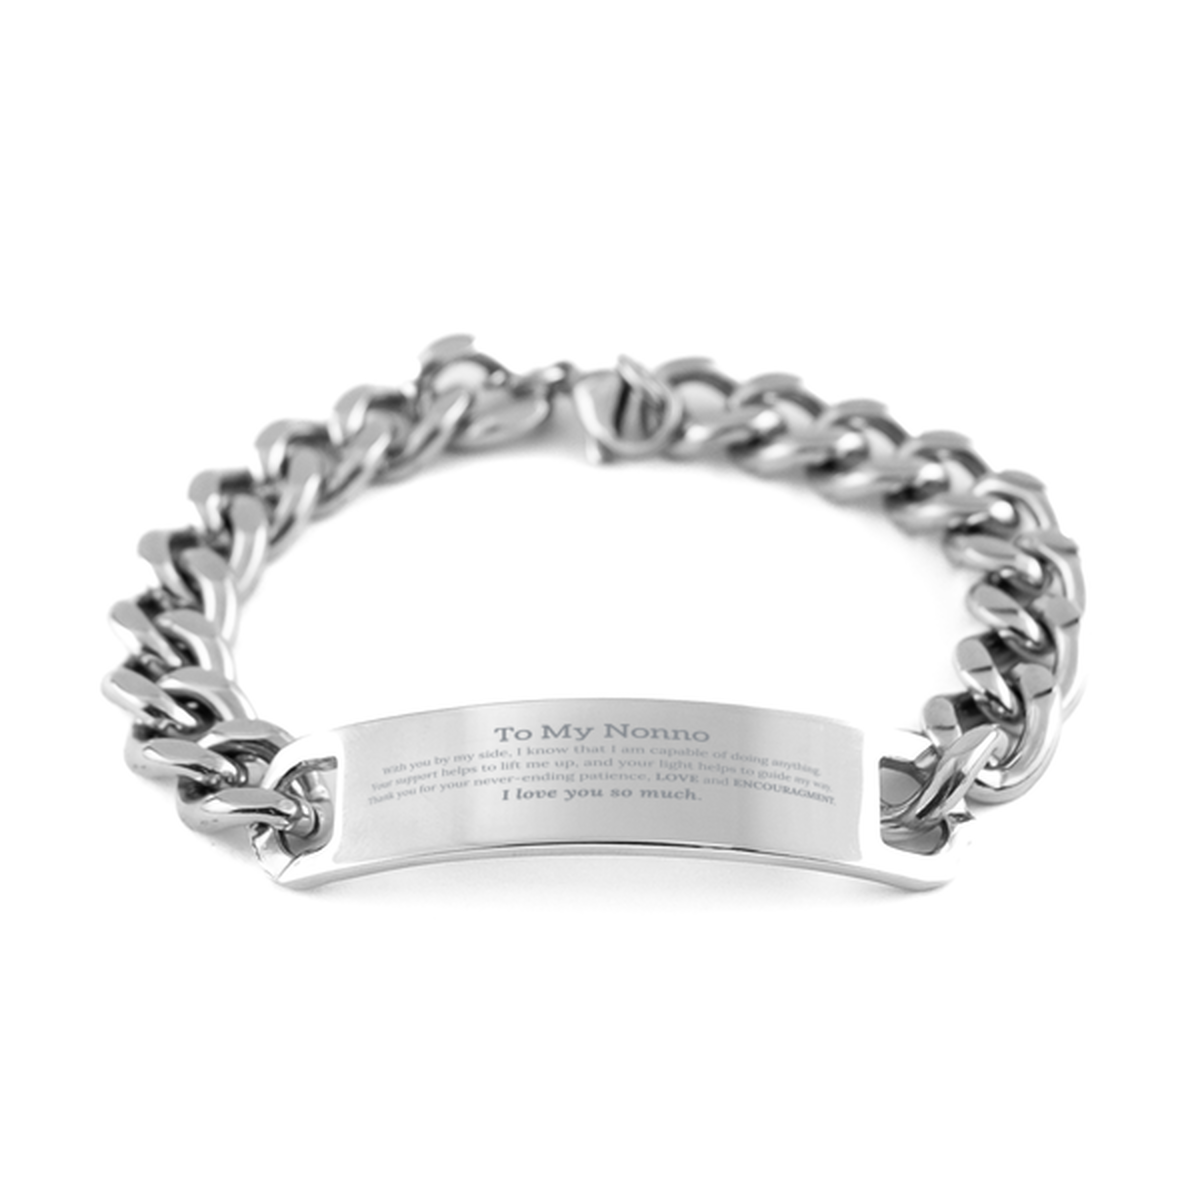 Appreciation Nonno Cuban Chain Stainless Steel Bracelet Gifts, To My Nonno Birthday Christmas Wedding Keepsake Gifts for Nonno With you by my side, I know that I am capable of doing anything. I love you so much